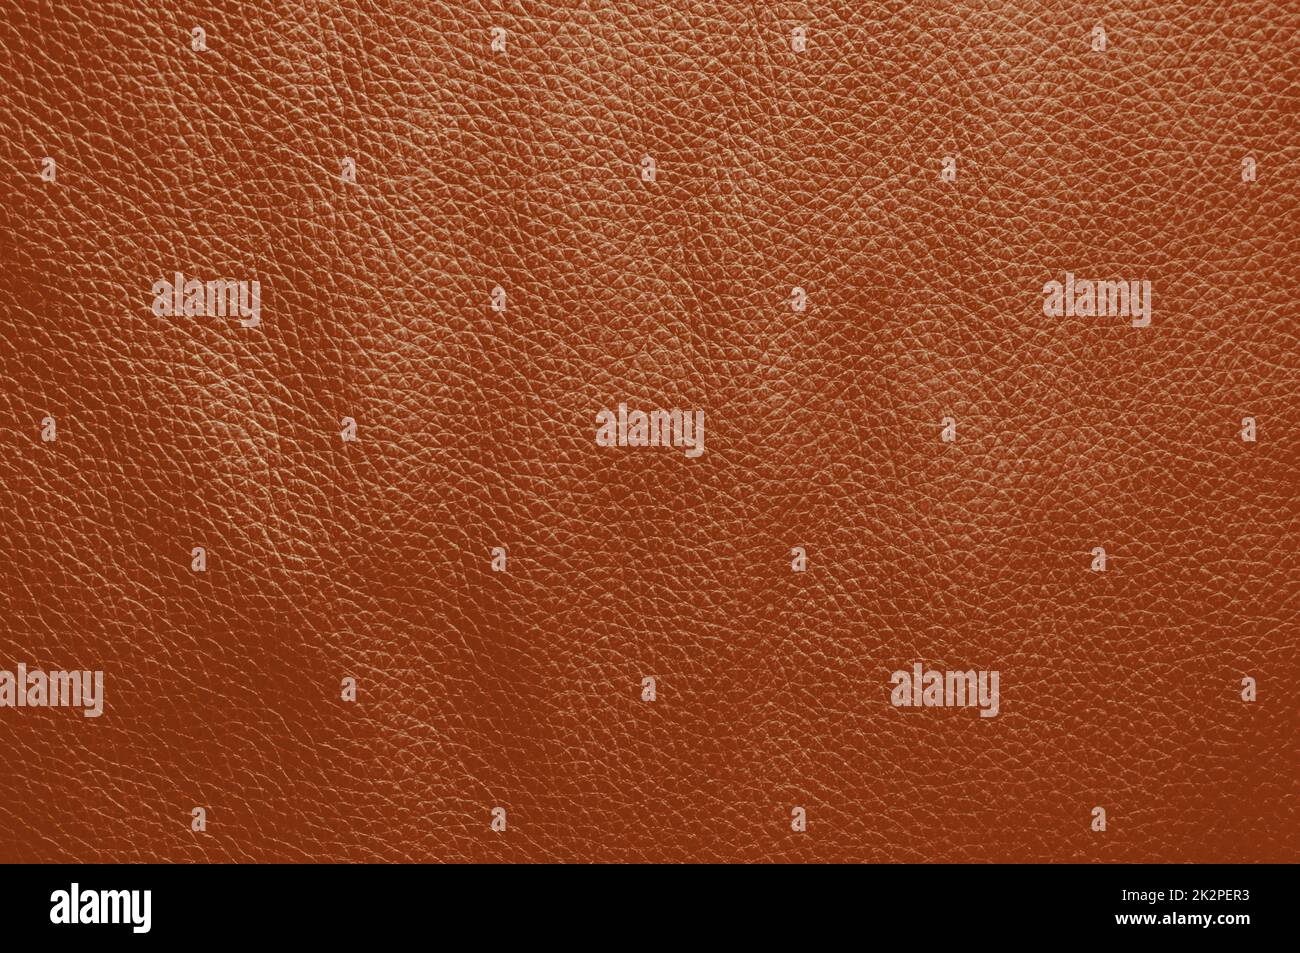 Natural leather texture with red brown color Stock Photo